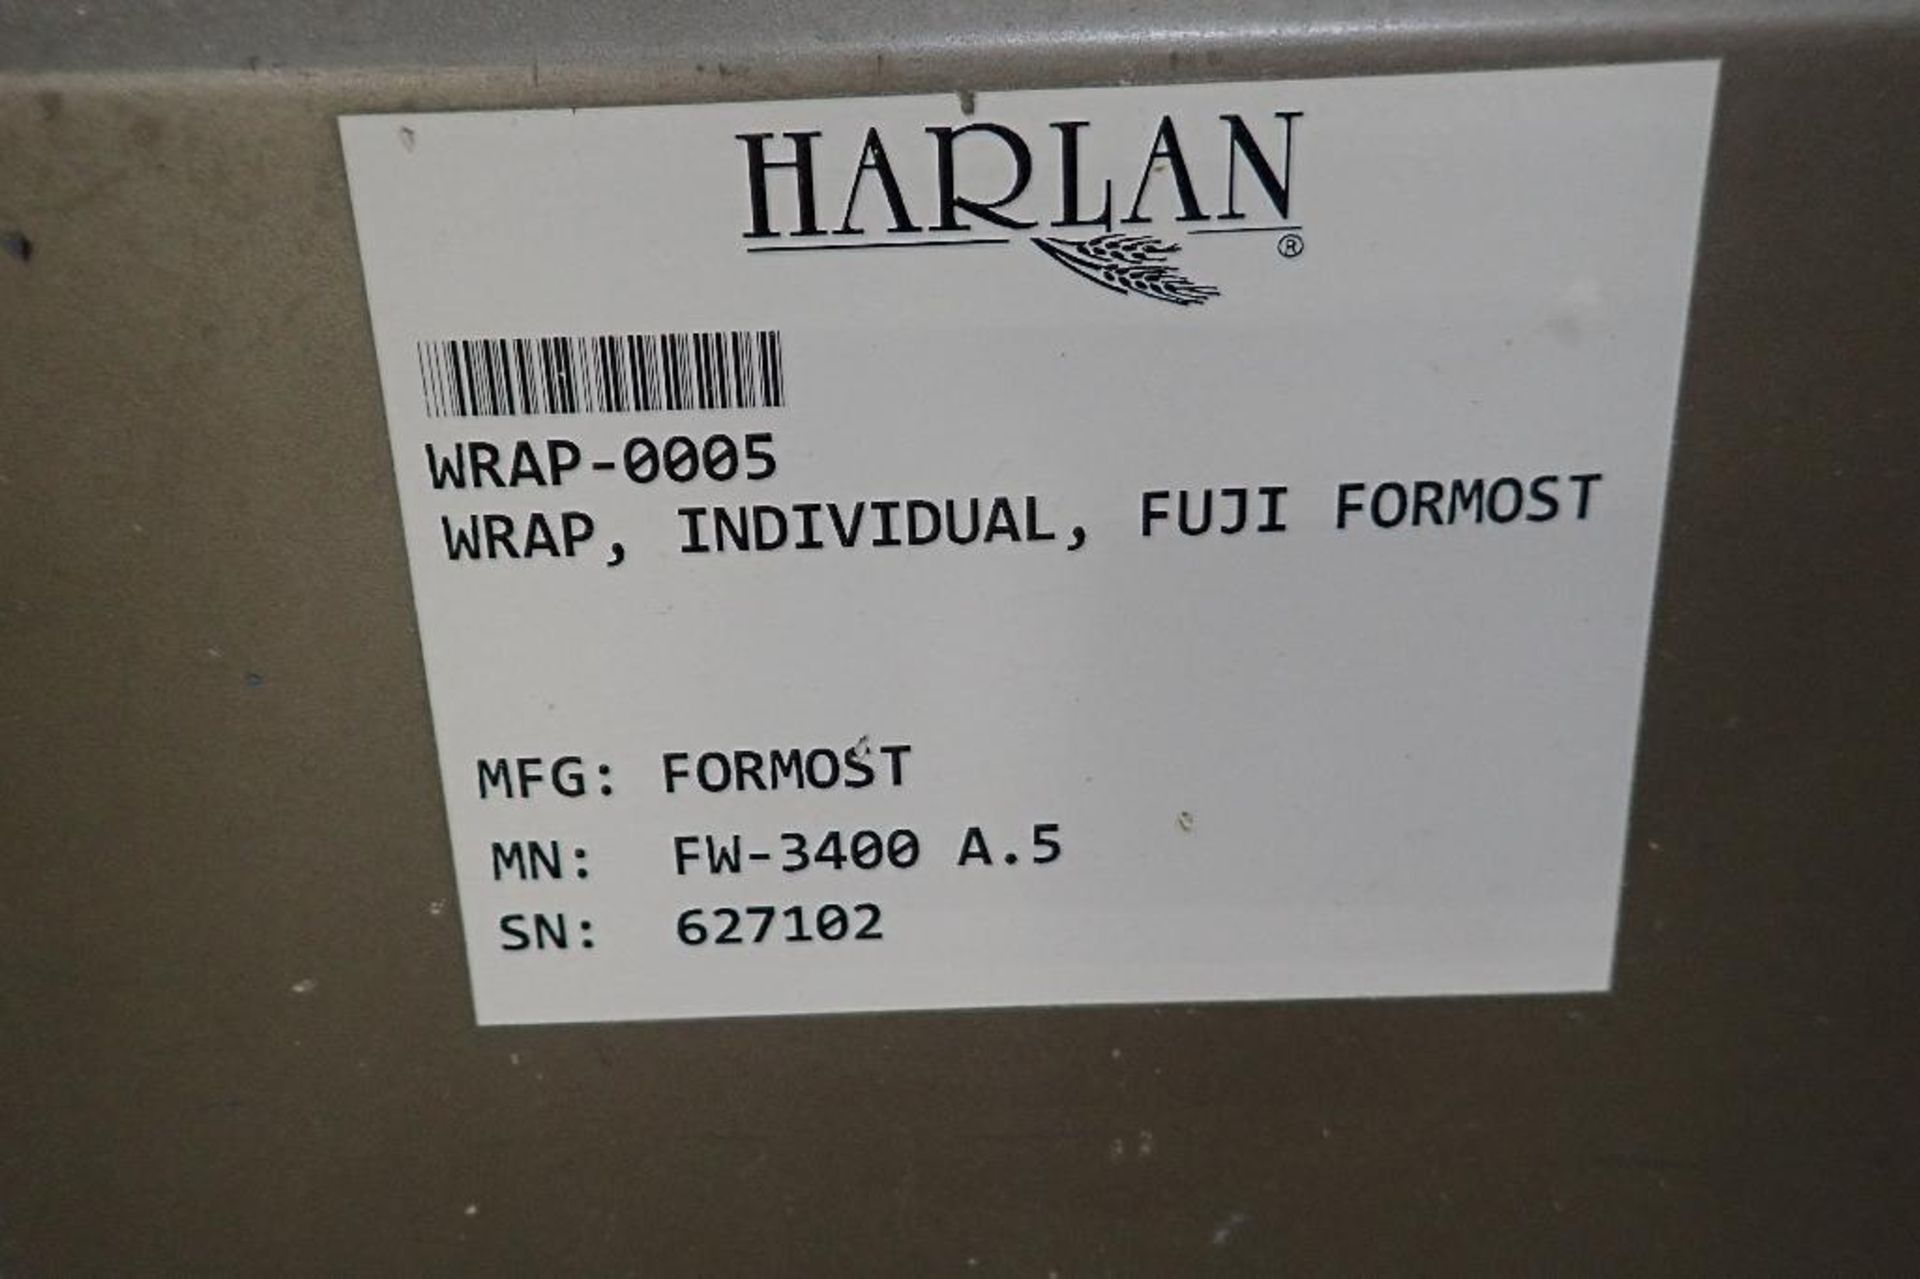 Fuji foremost horizontal form-fill-seal machine, Model FW3400, SN 627102, 14 in. lug infeed, 17 in. - Image 15 of 16